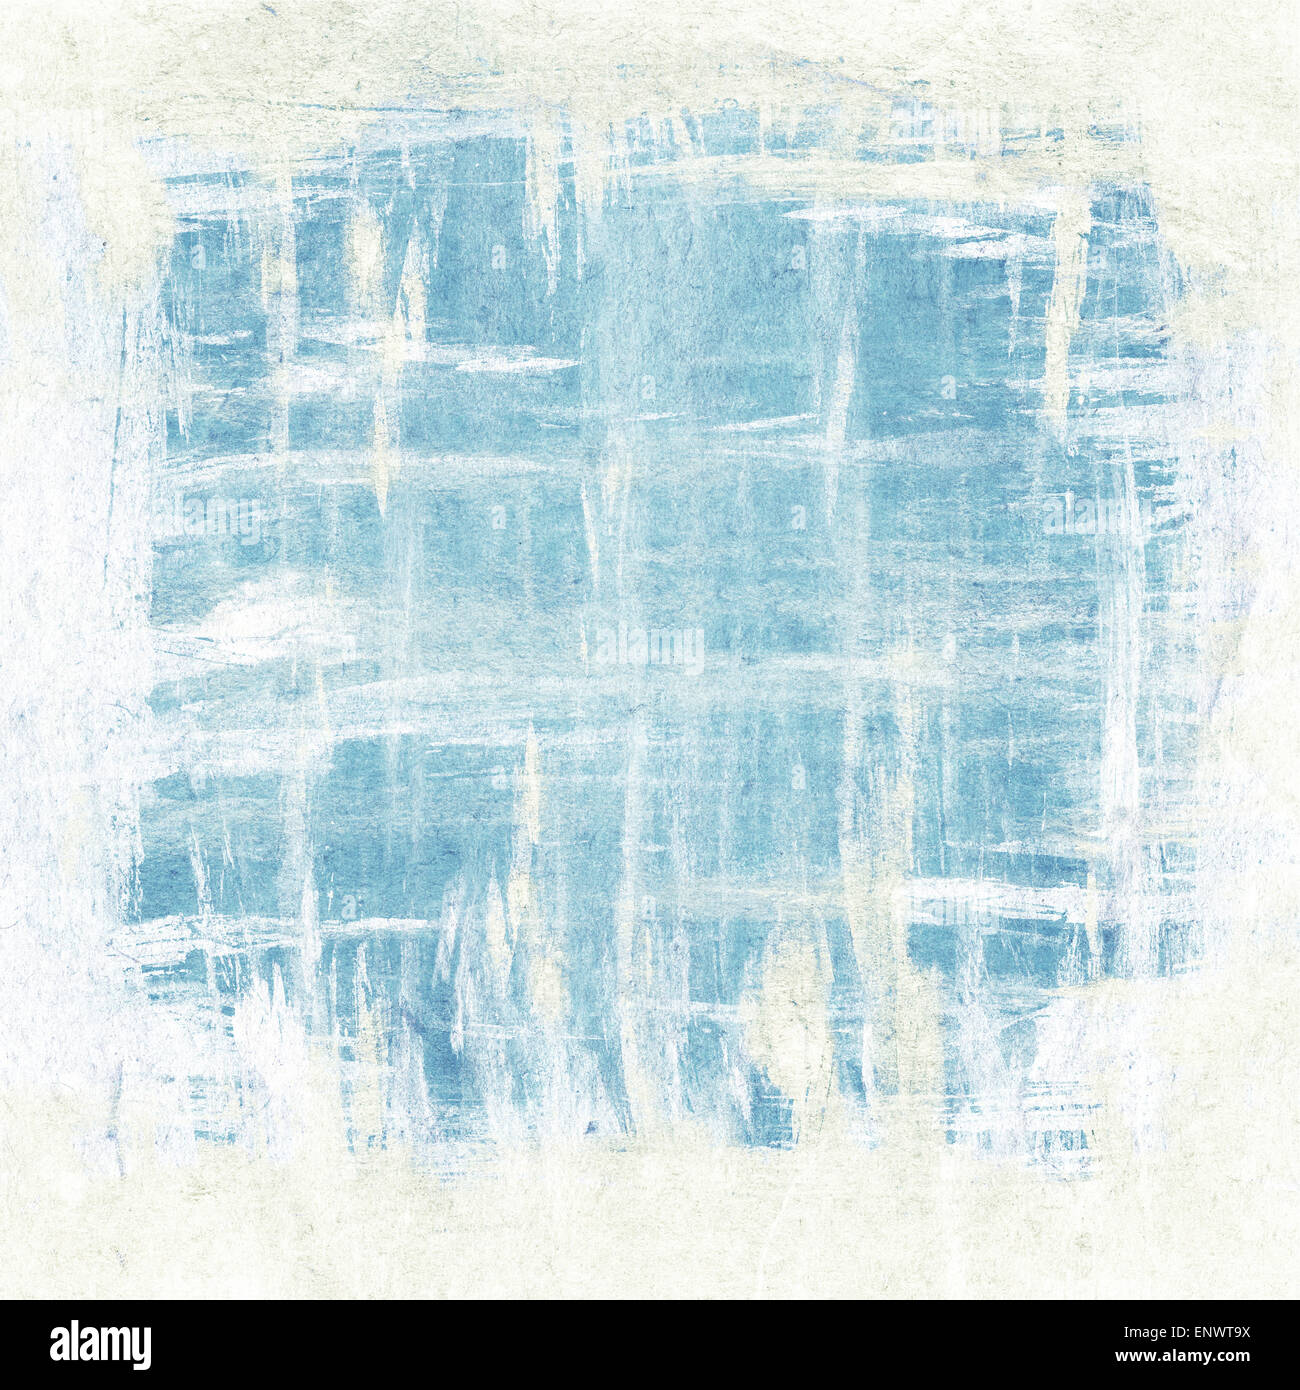 Abstract brush strokes painting, blue and white colors. Watercolor background Stock Photo